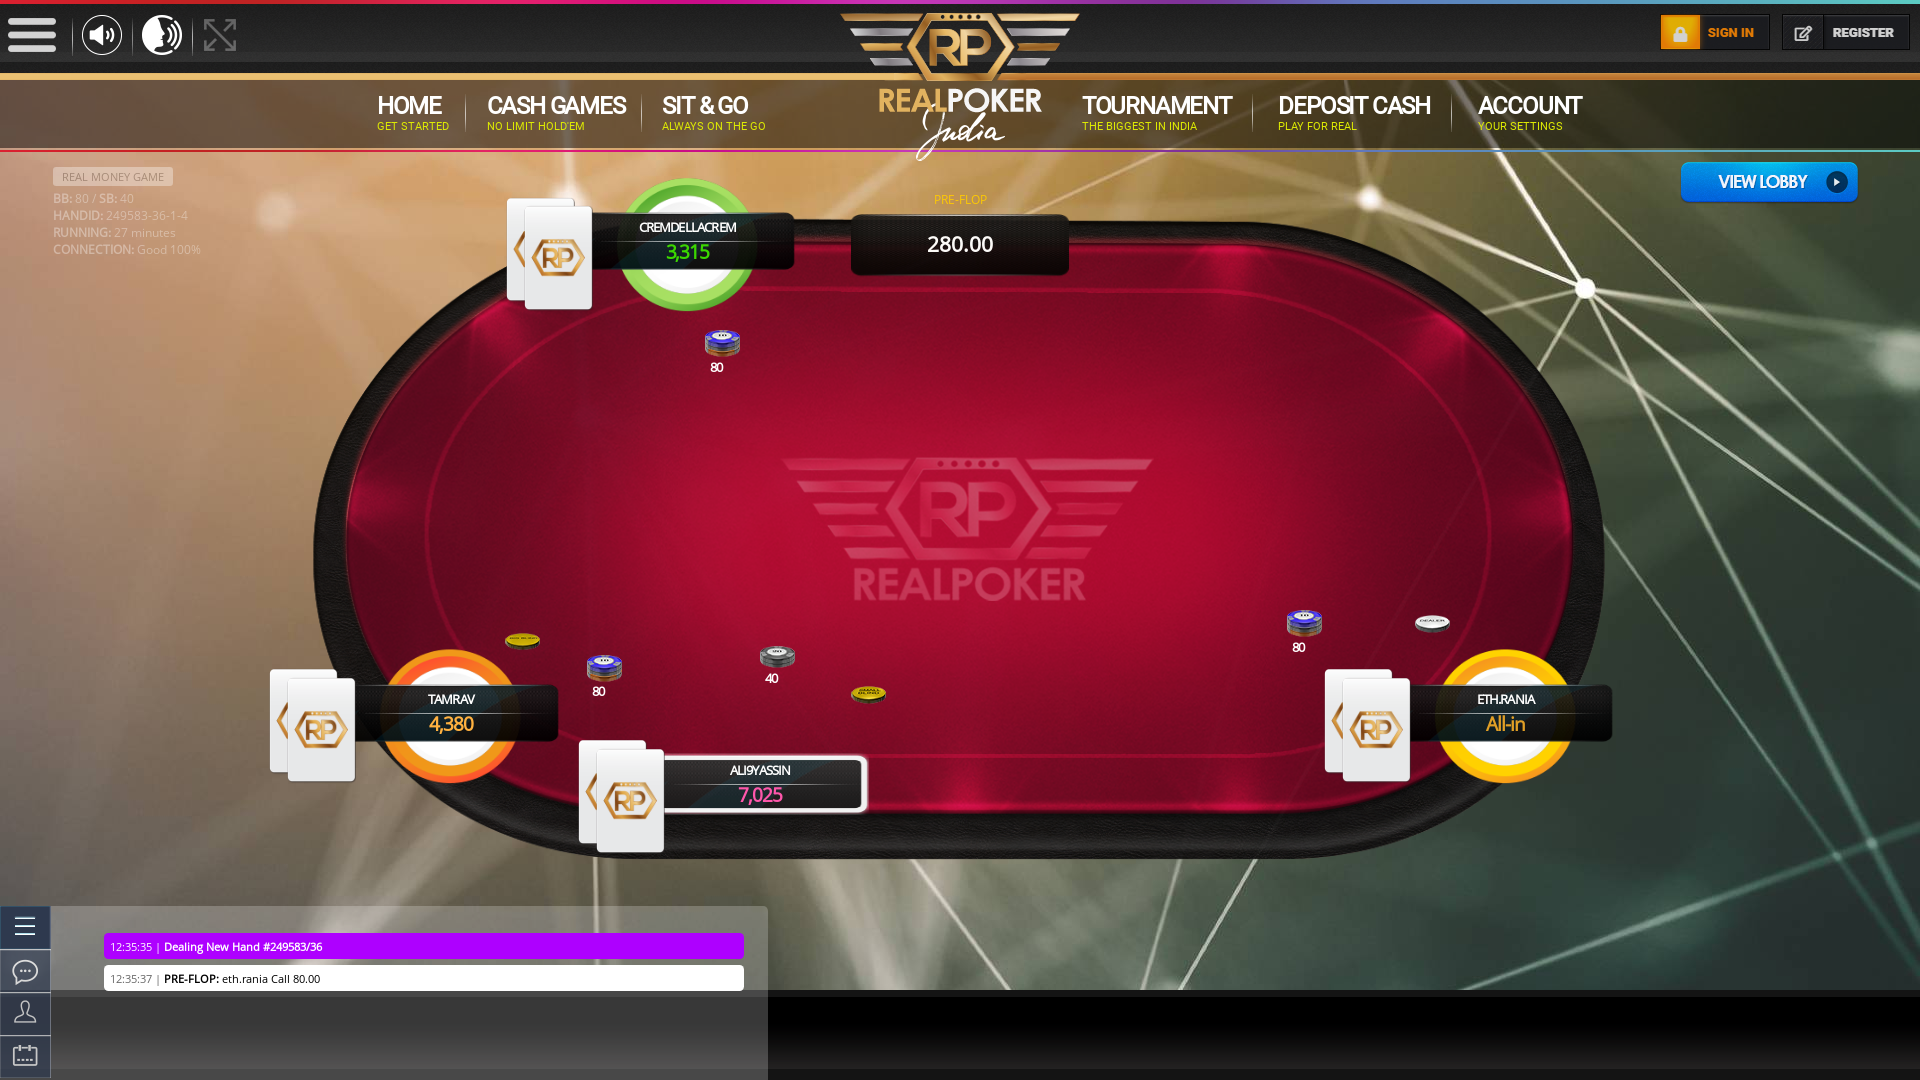 Indiranagar, Bengaluru online poker game on a 10 player table in the 27th minute of the game